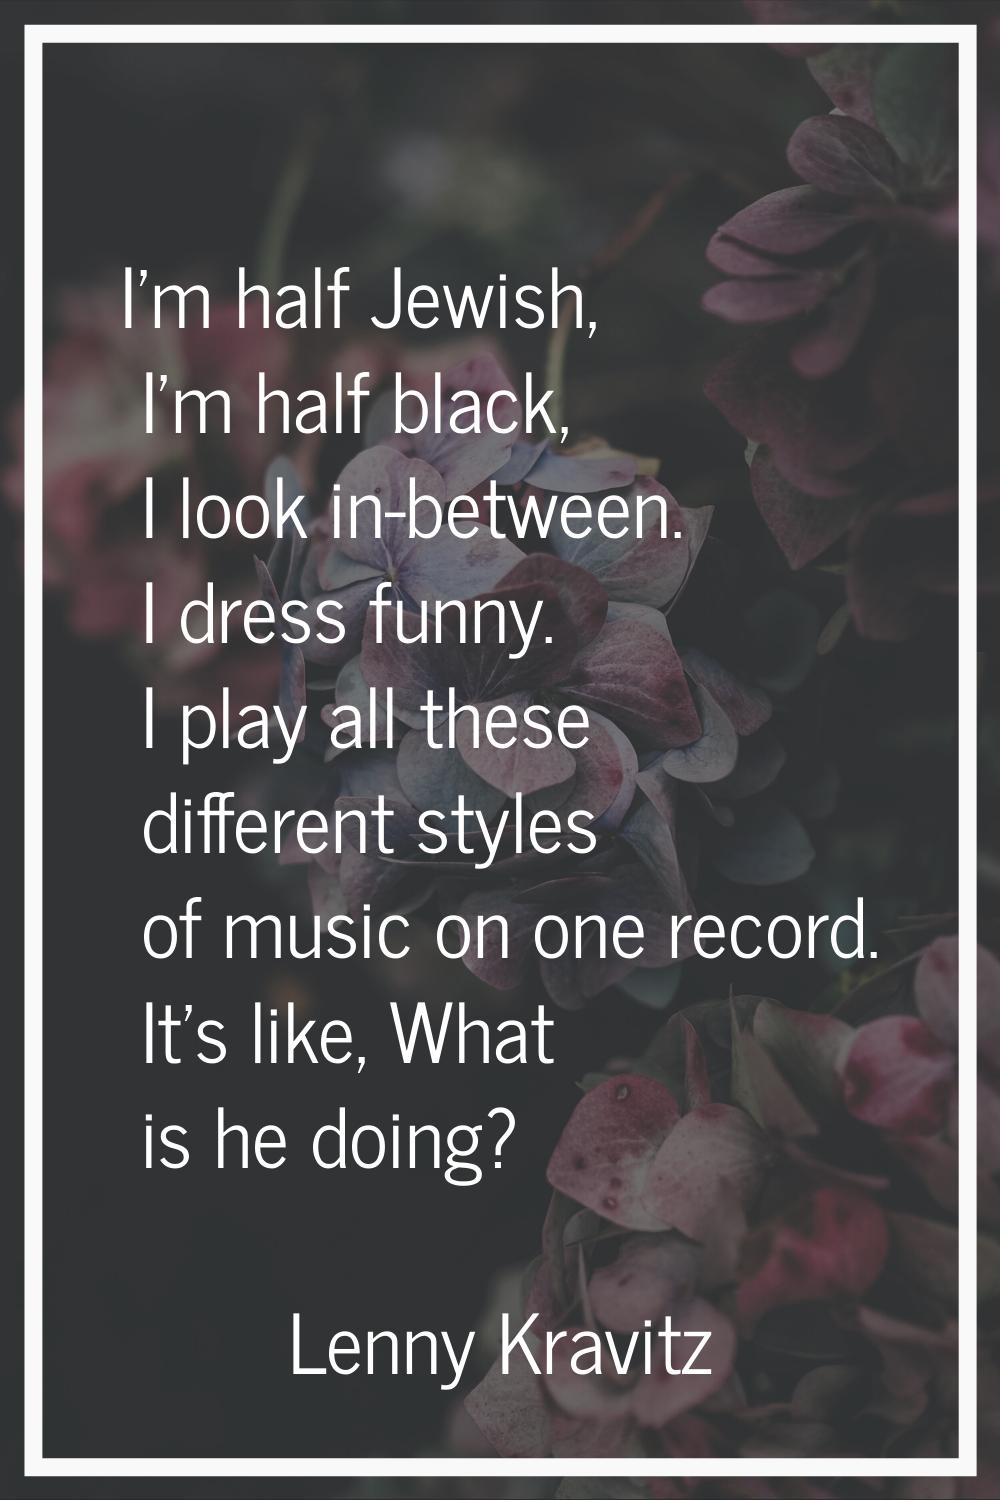 I'm half Jewish, I'm half black, I look in-between. I dress funny. I play all these different style